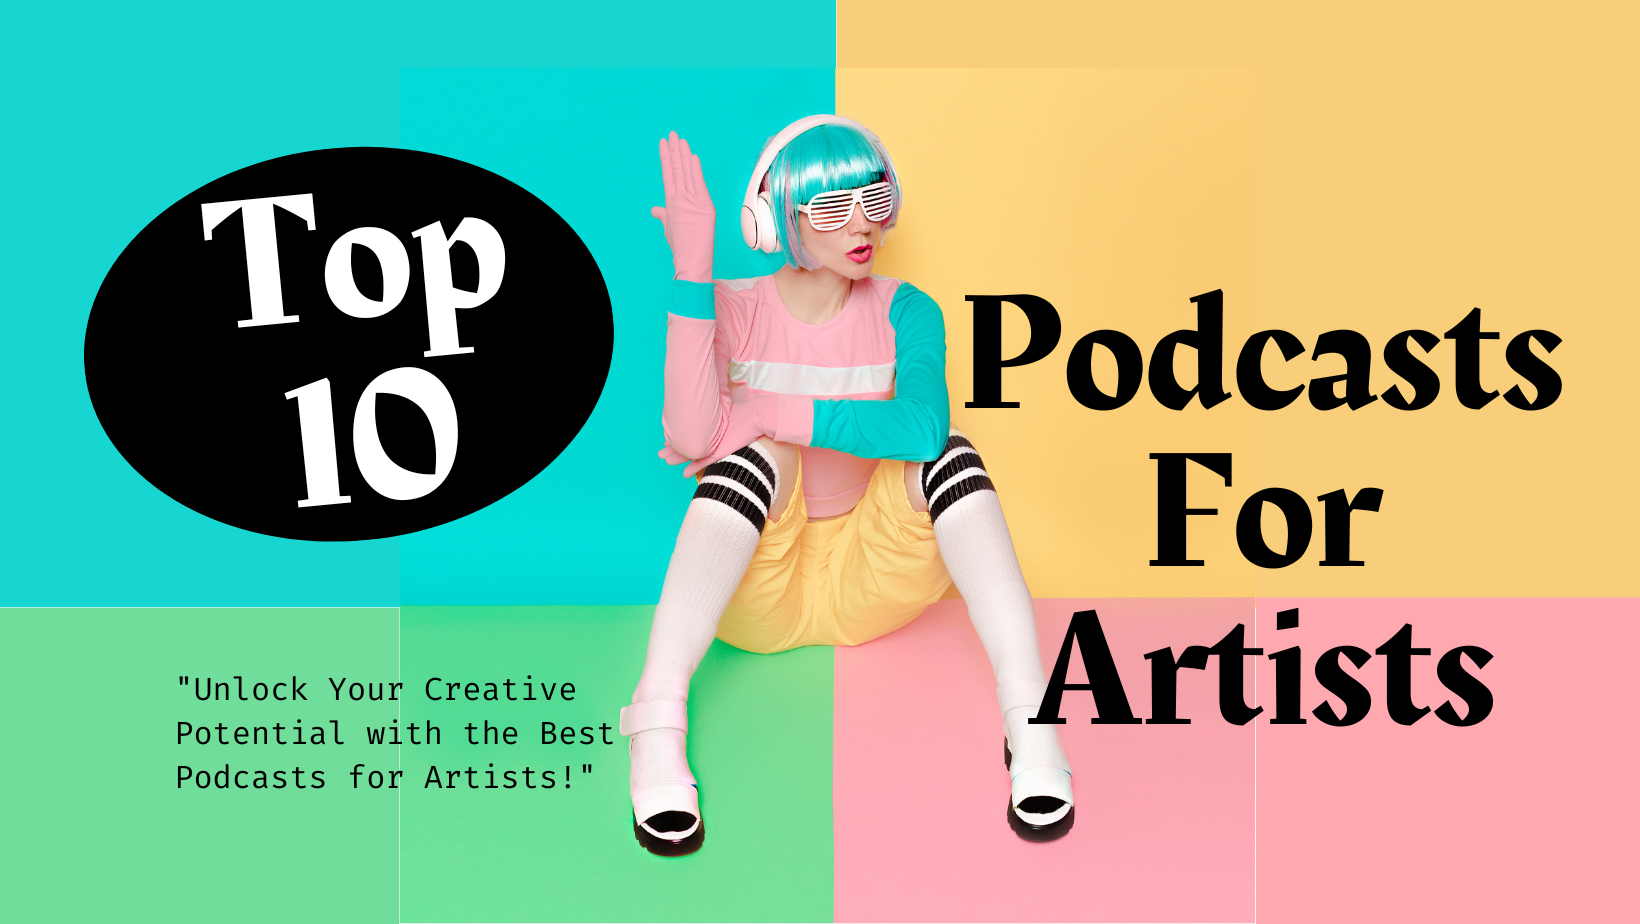 Top 10 Podcasts For Artists